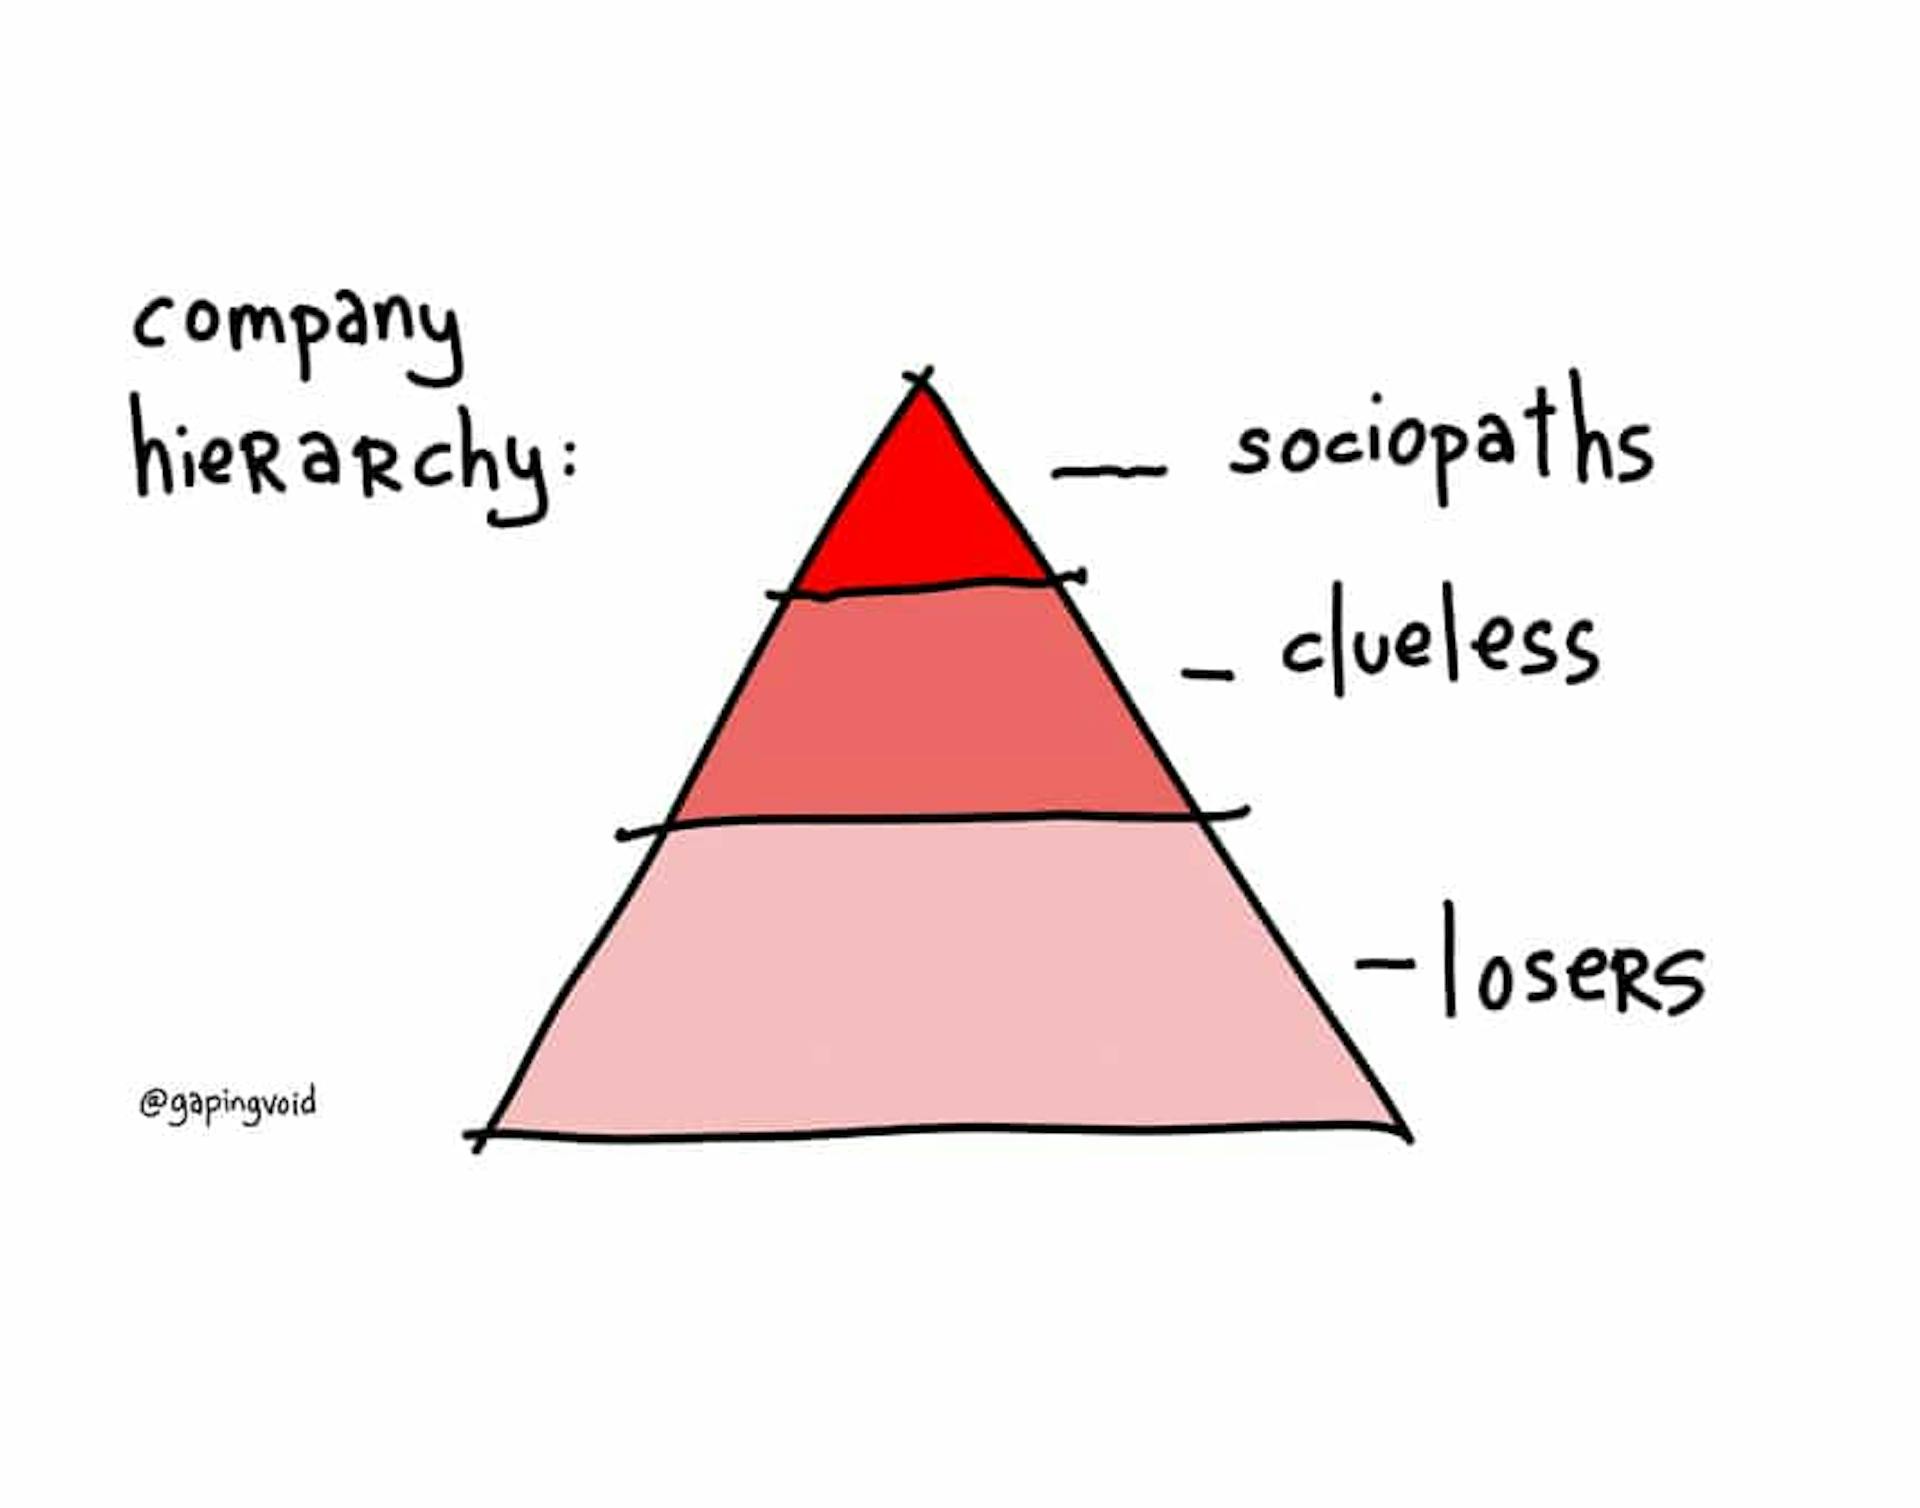 Don't let your hierarchy look like this